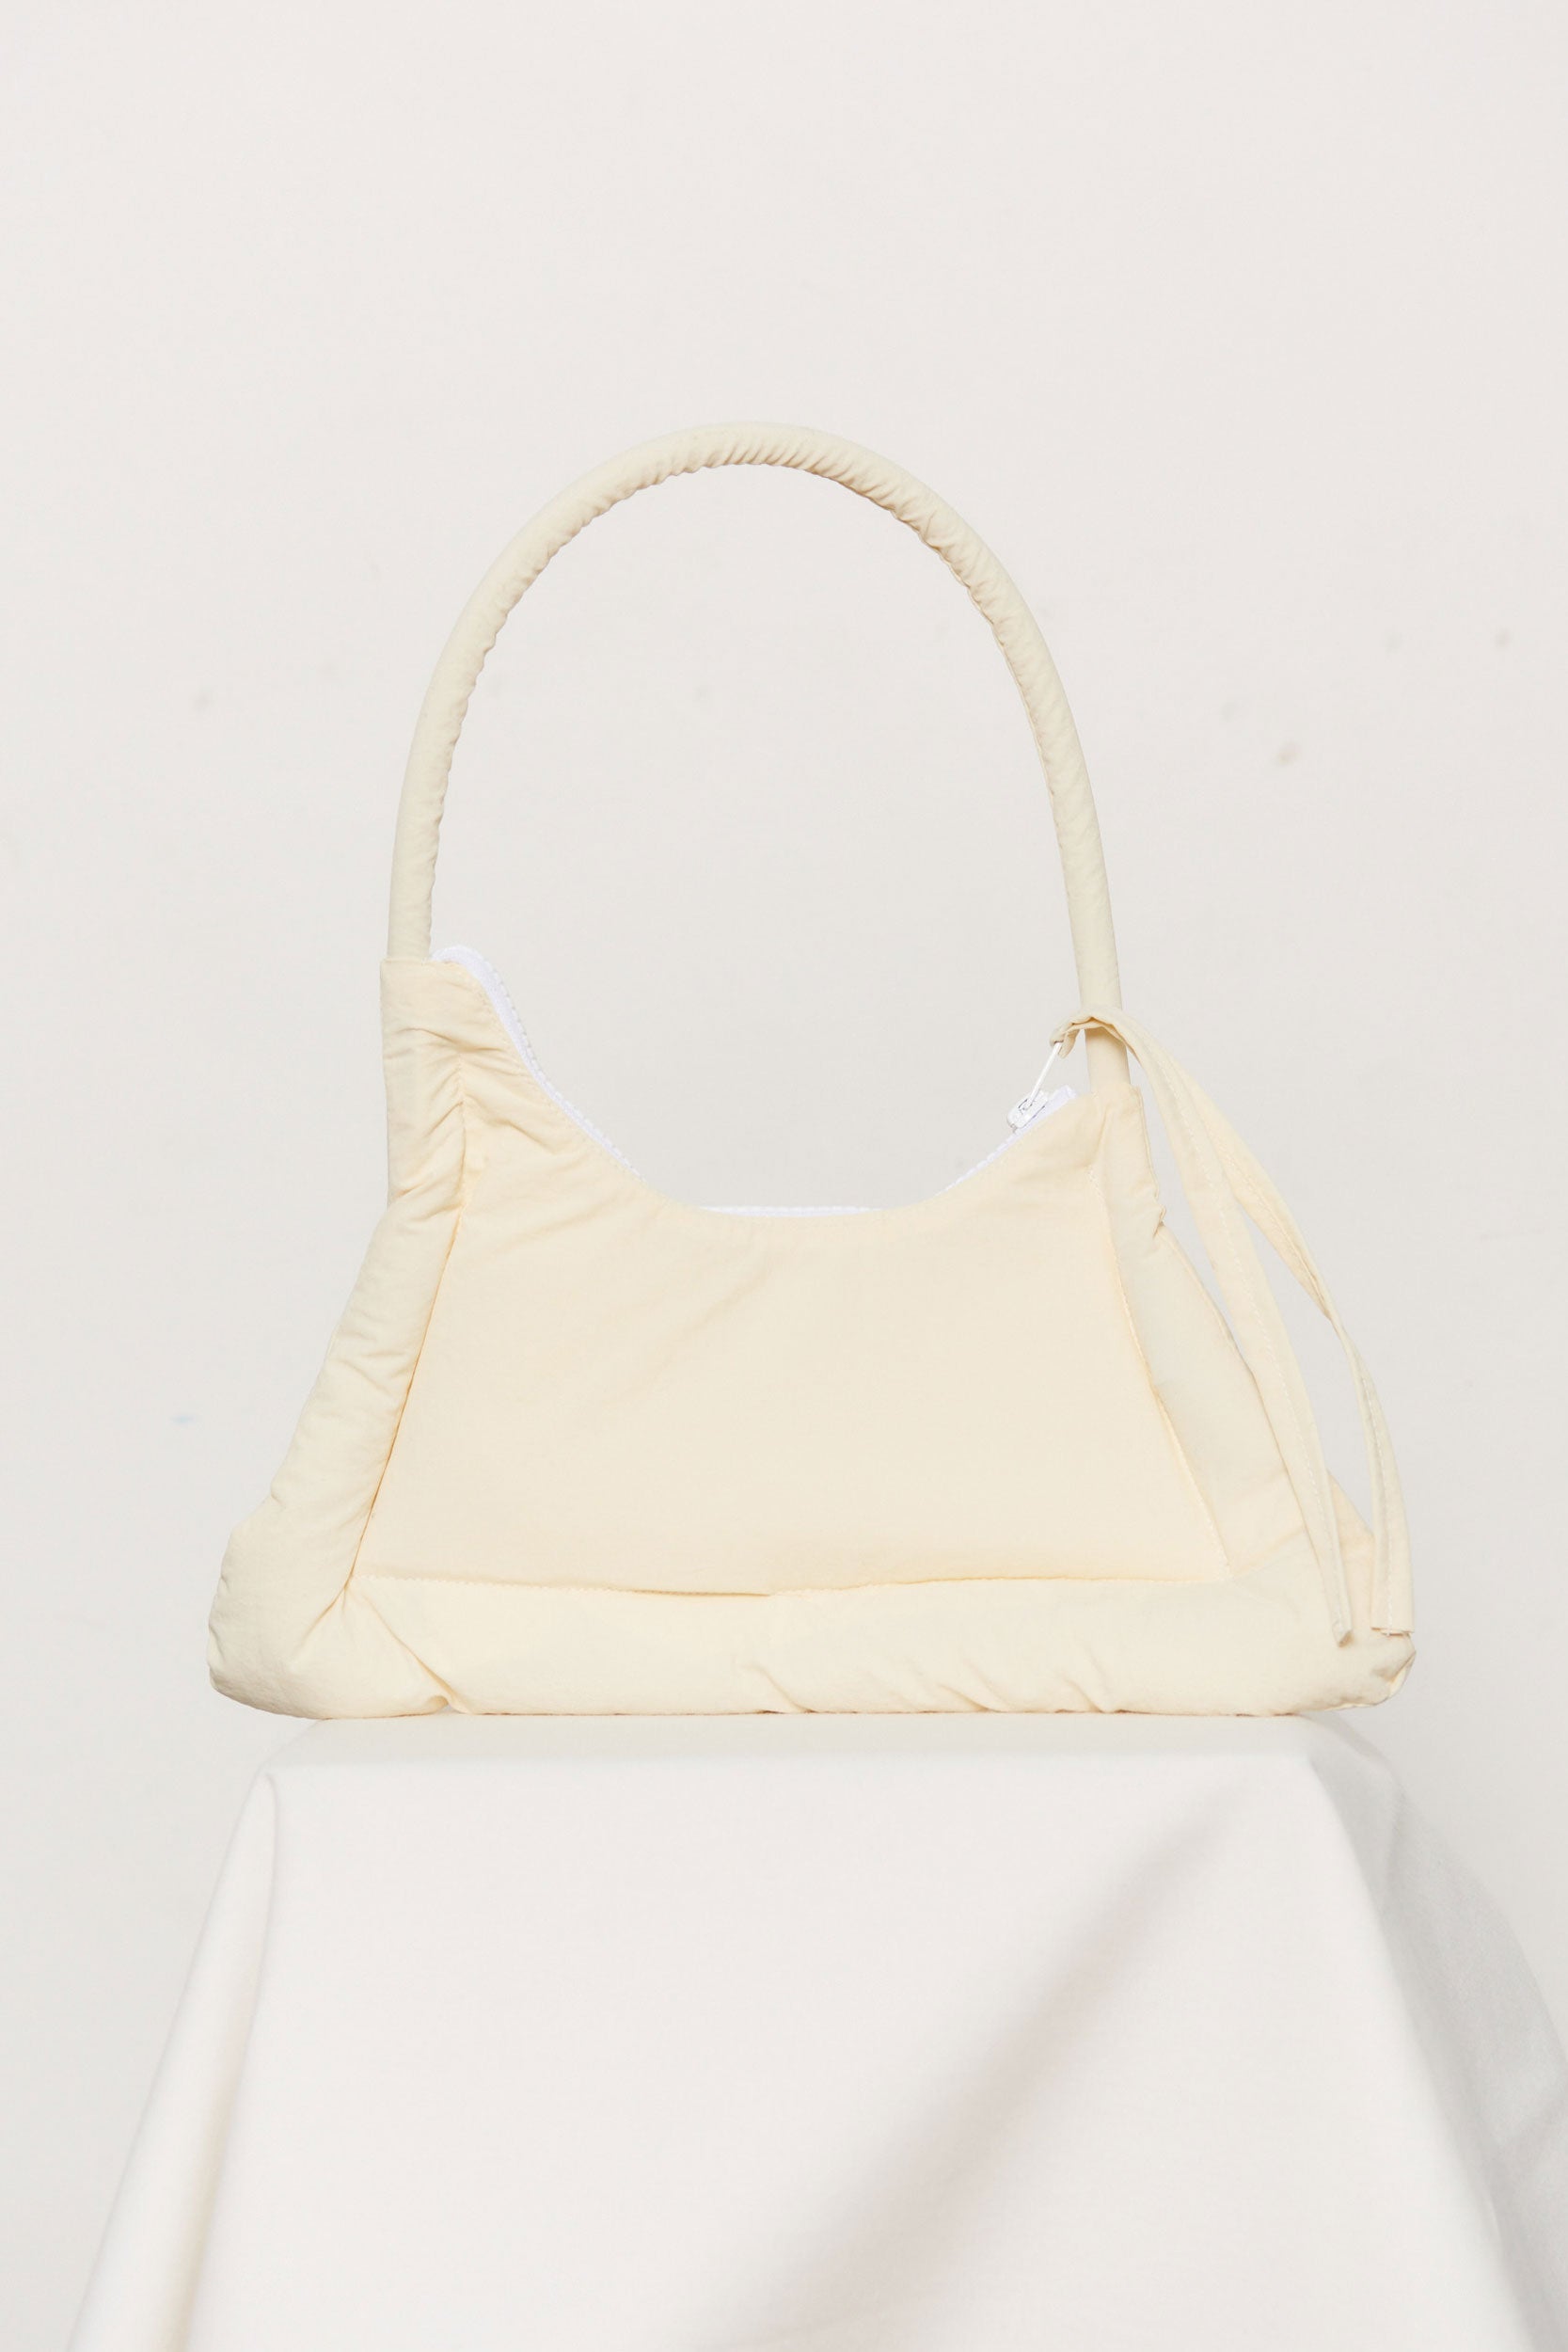 Load image into Gallery viewer, TRAPECIO FLAT BAG - OFF WHITE
